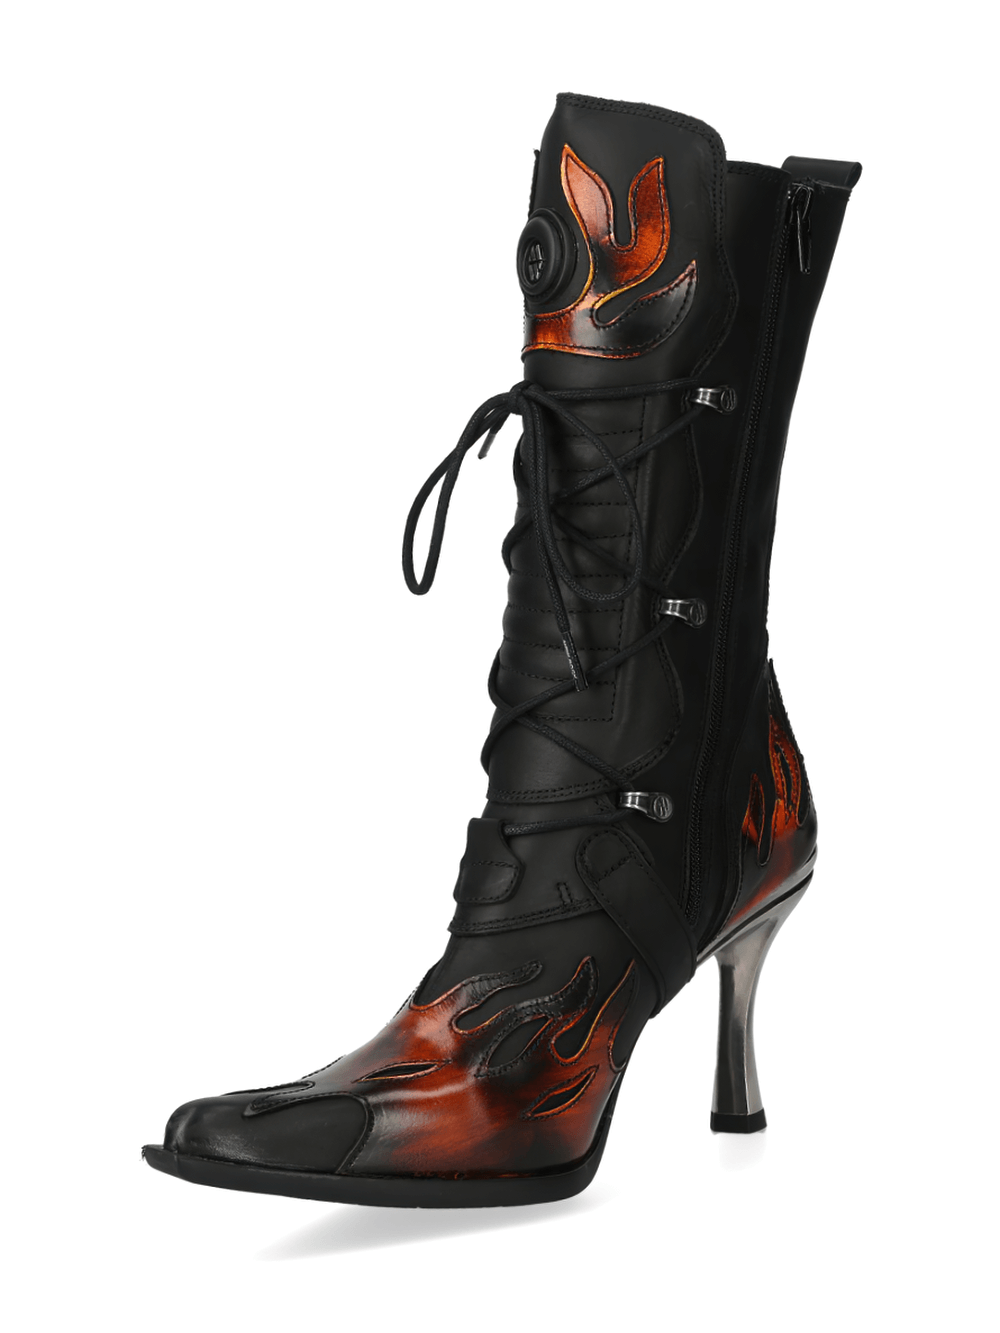 NEW ROCK Flame Accented Heeled Boots with Buckles